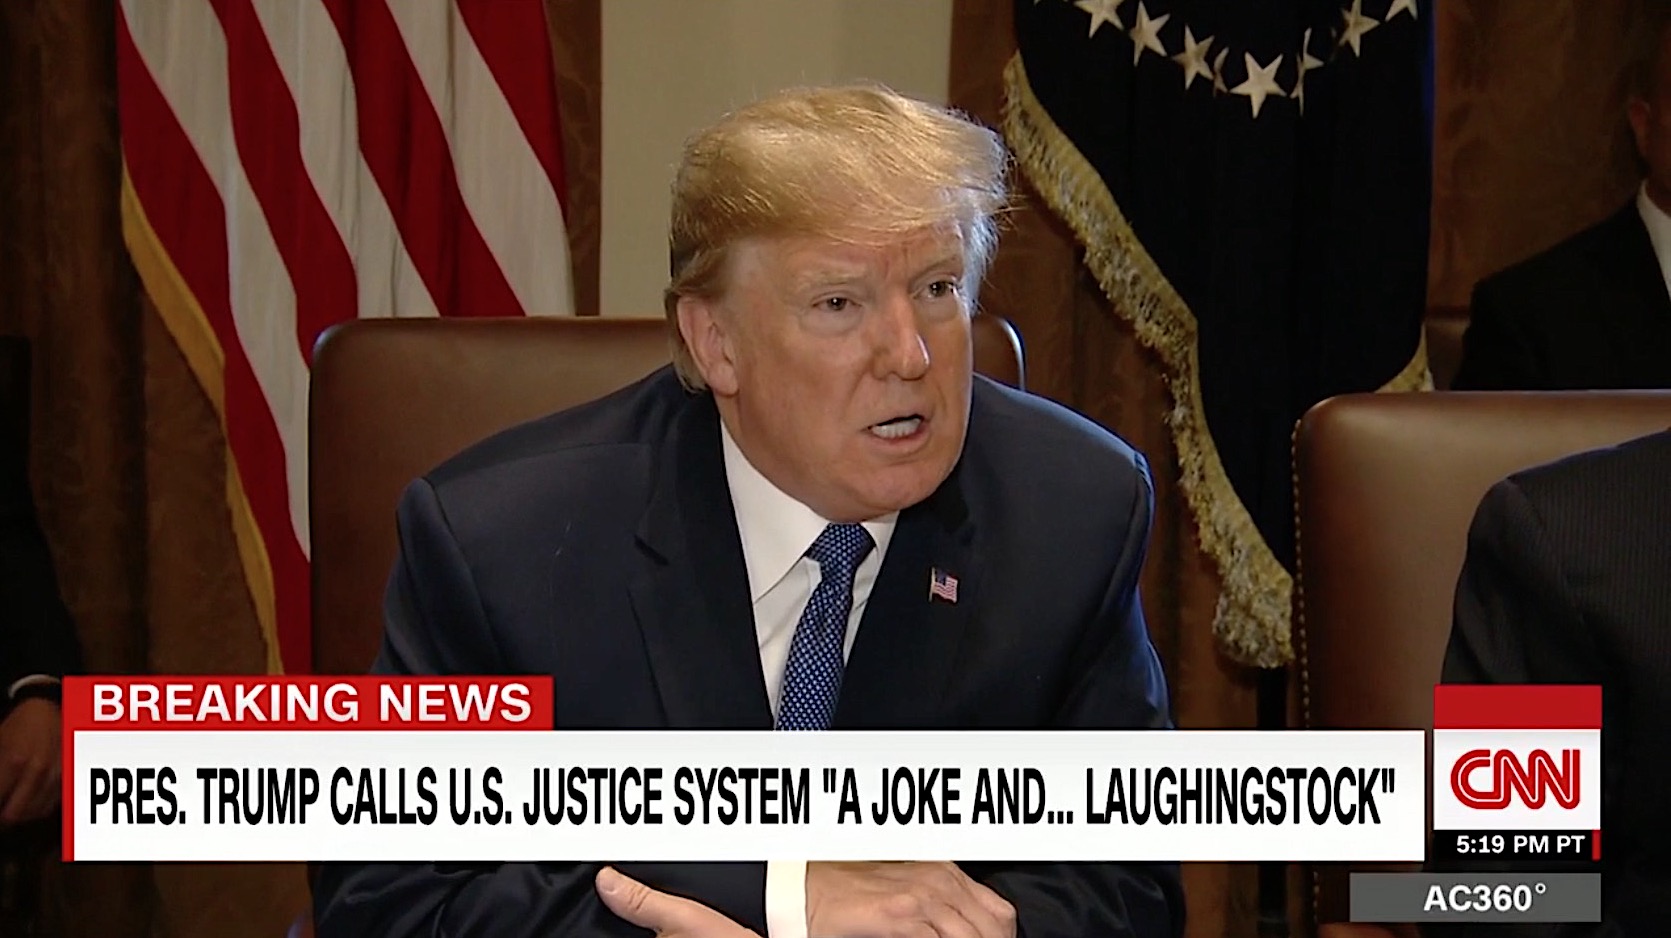 President Trump on the U.S. justice system